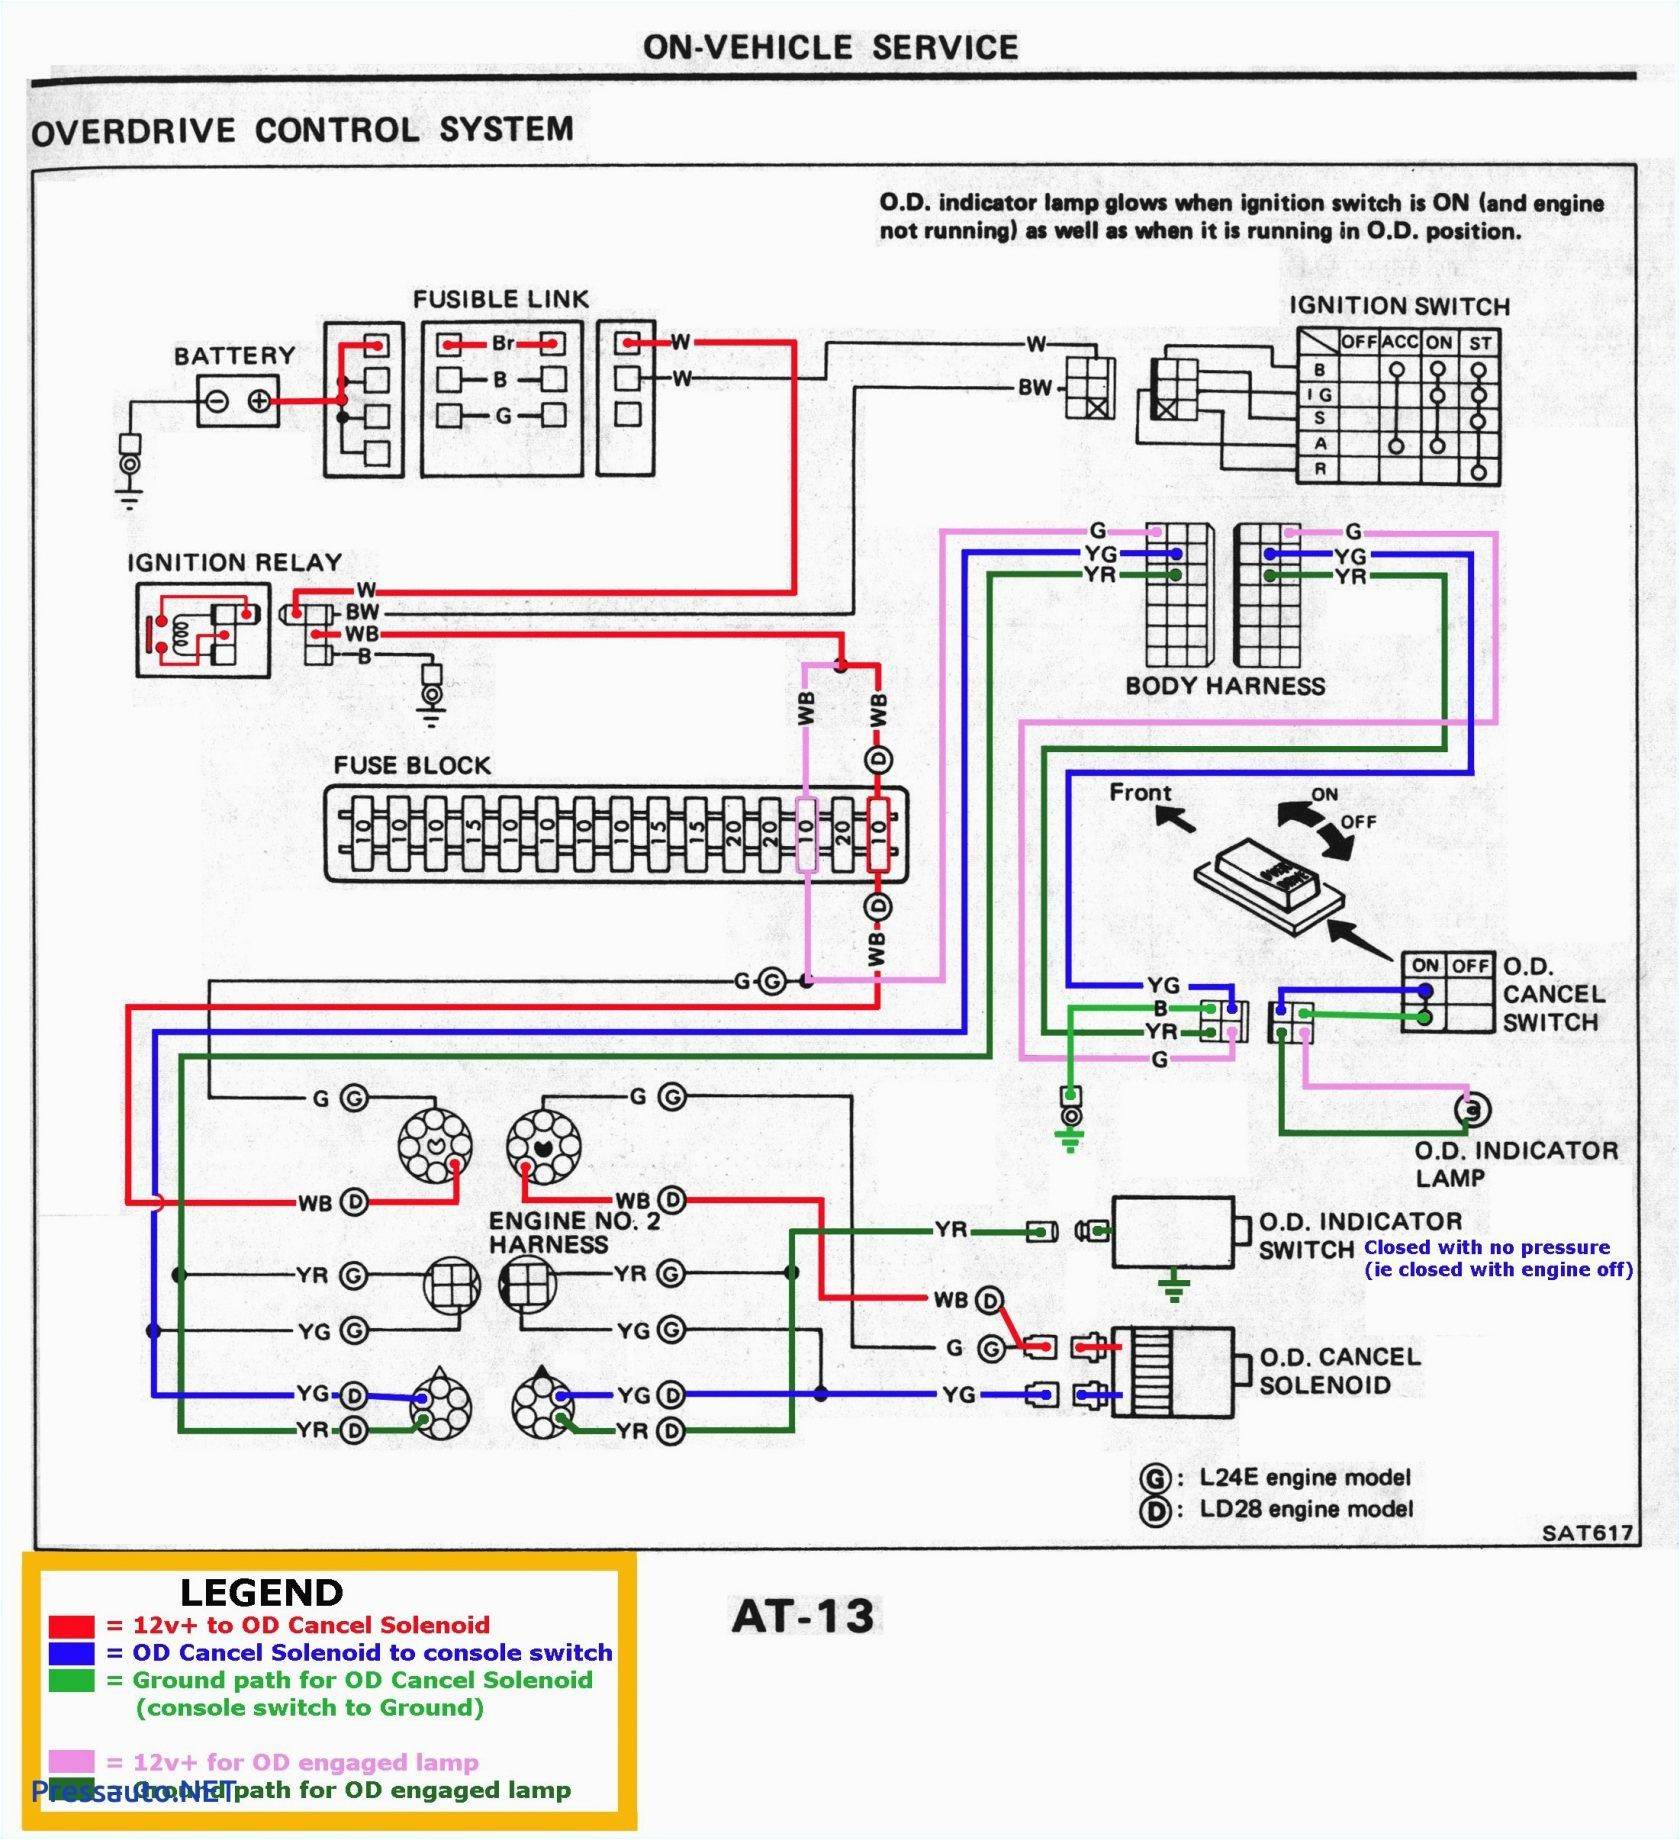 Wiring A Shed From A House Diagram Logic 7 Amp Diagram Wiring Diagram Expert